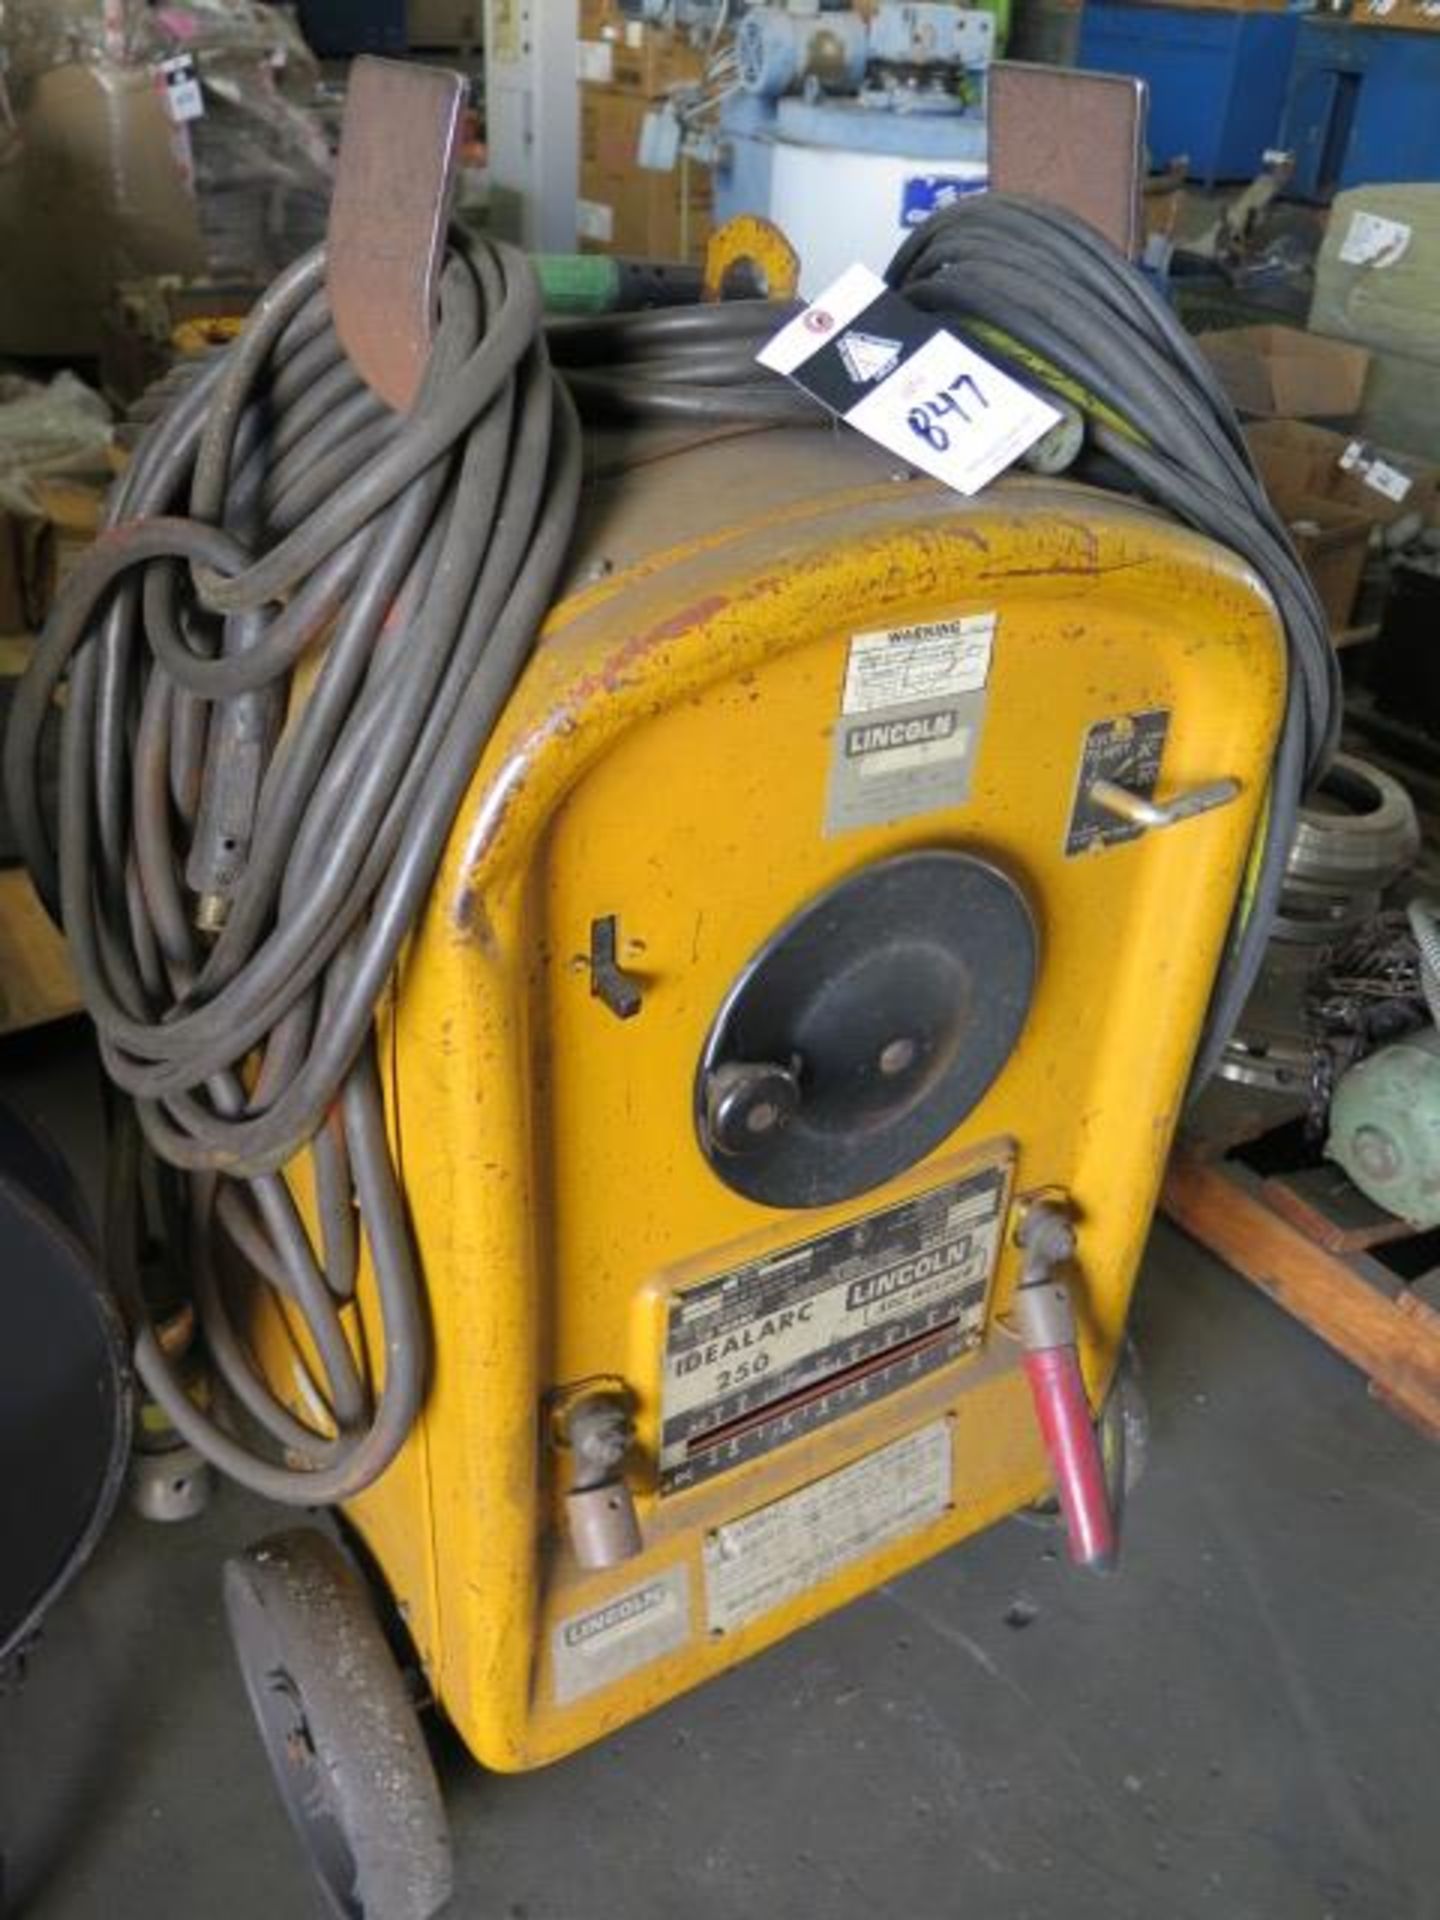 Lincoln Idealarc 250 Arc Welding Power Source (SOLD AS-IS - NO WARRANTY) - Image 2 of 5